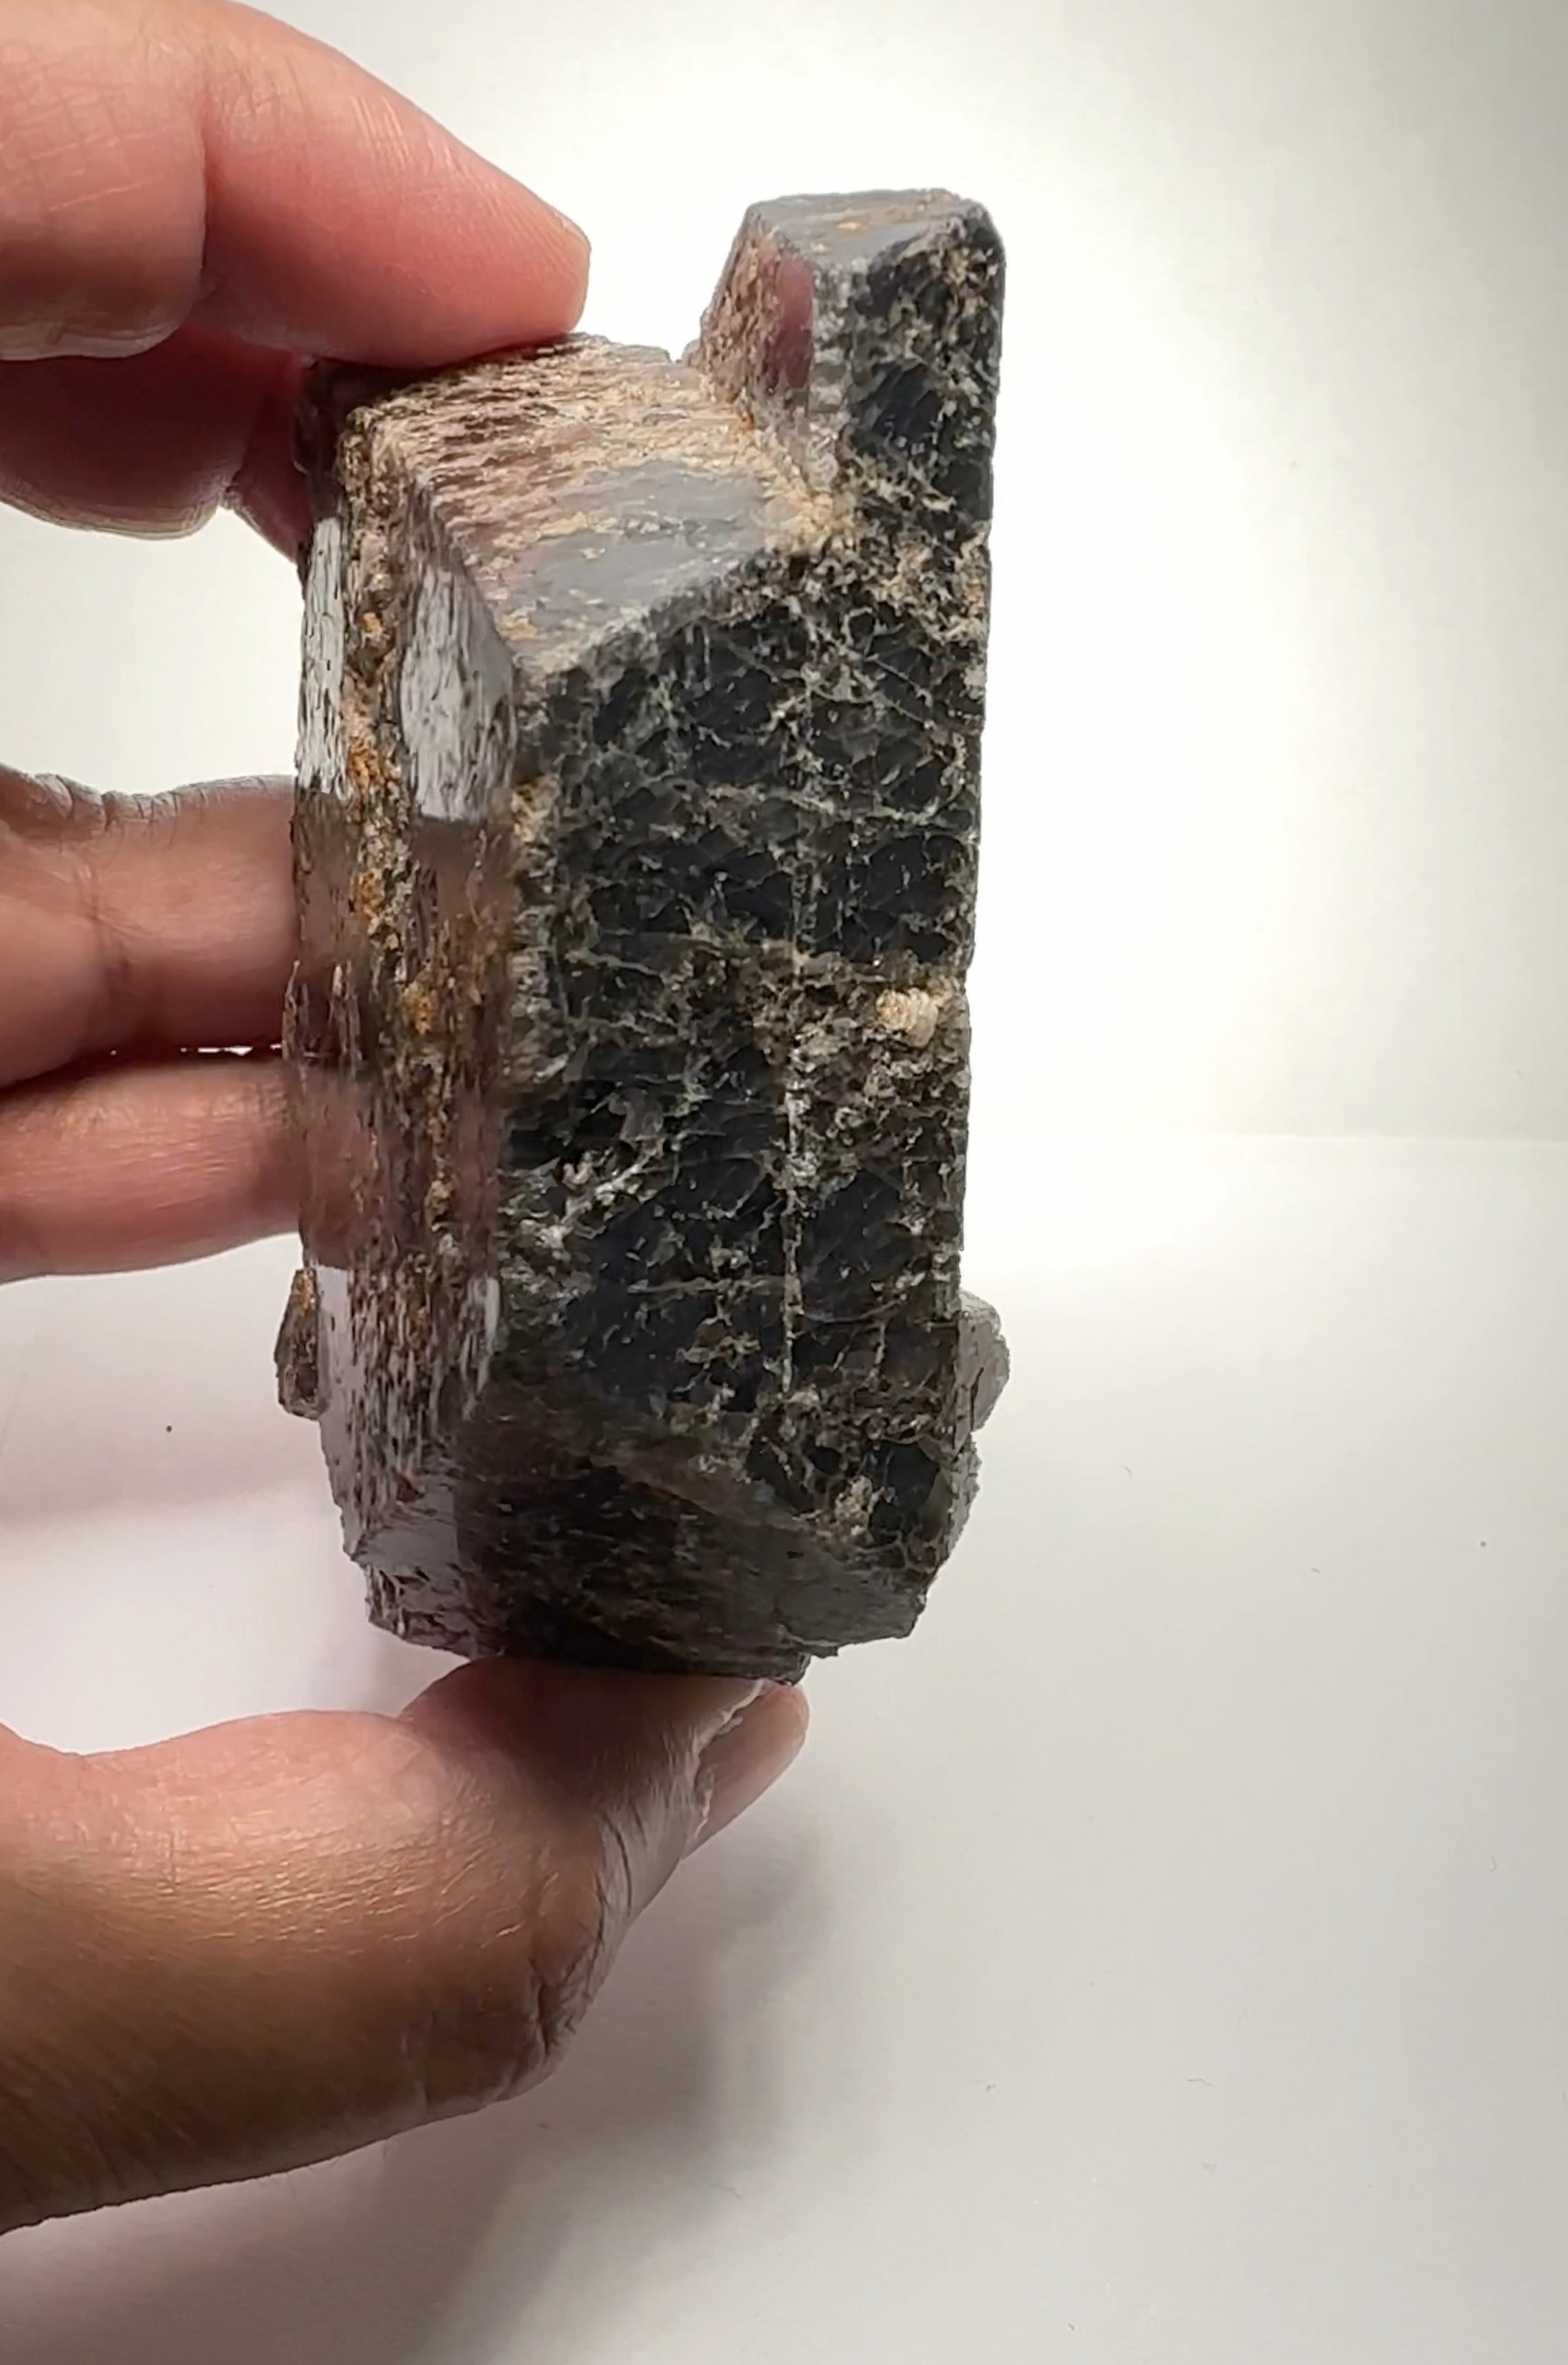 389Gm Massive Black Spinel Crystal From Mahenge In Tanzania. 389.00Gm / 1945Ct Untreated Unheated.